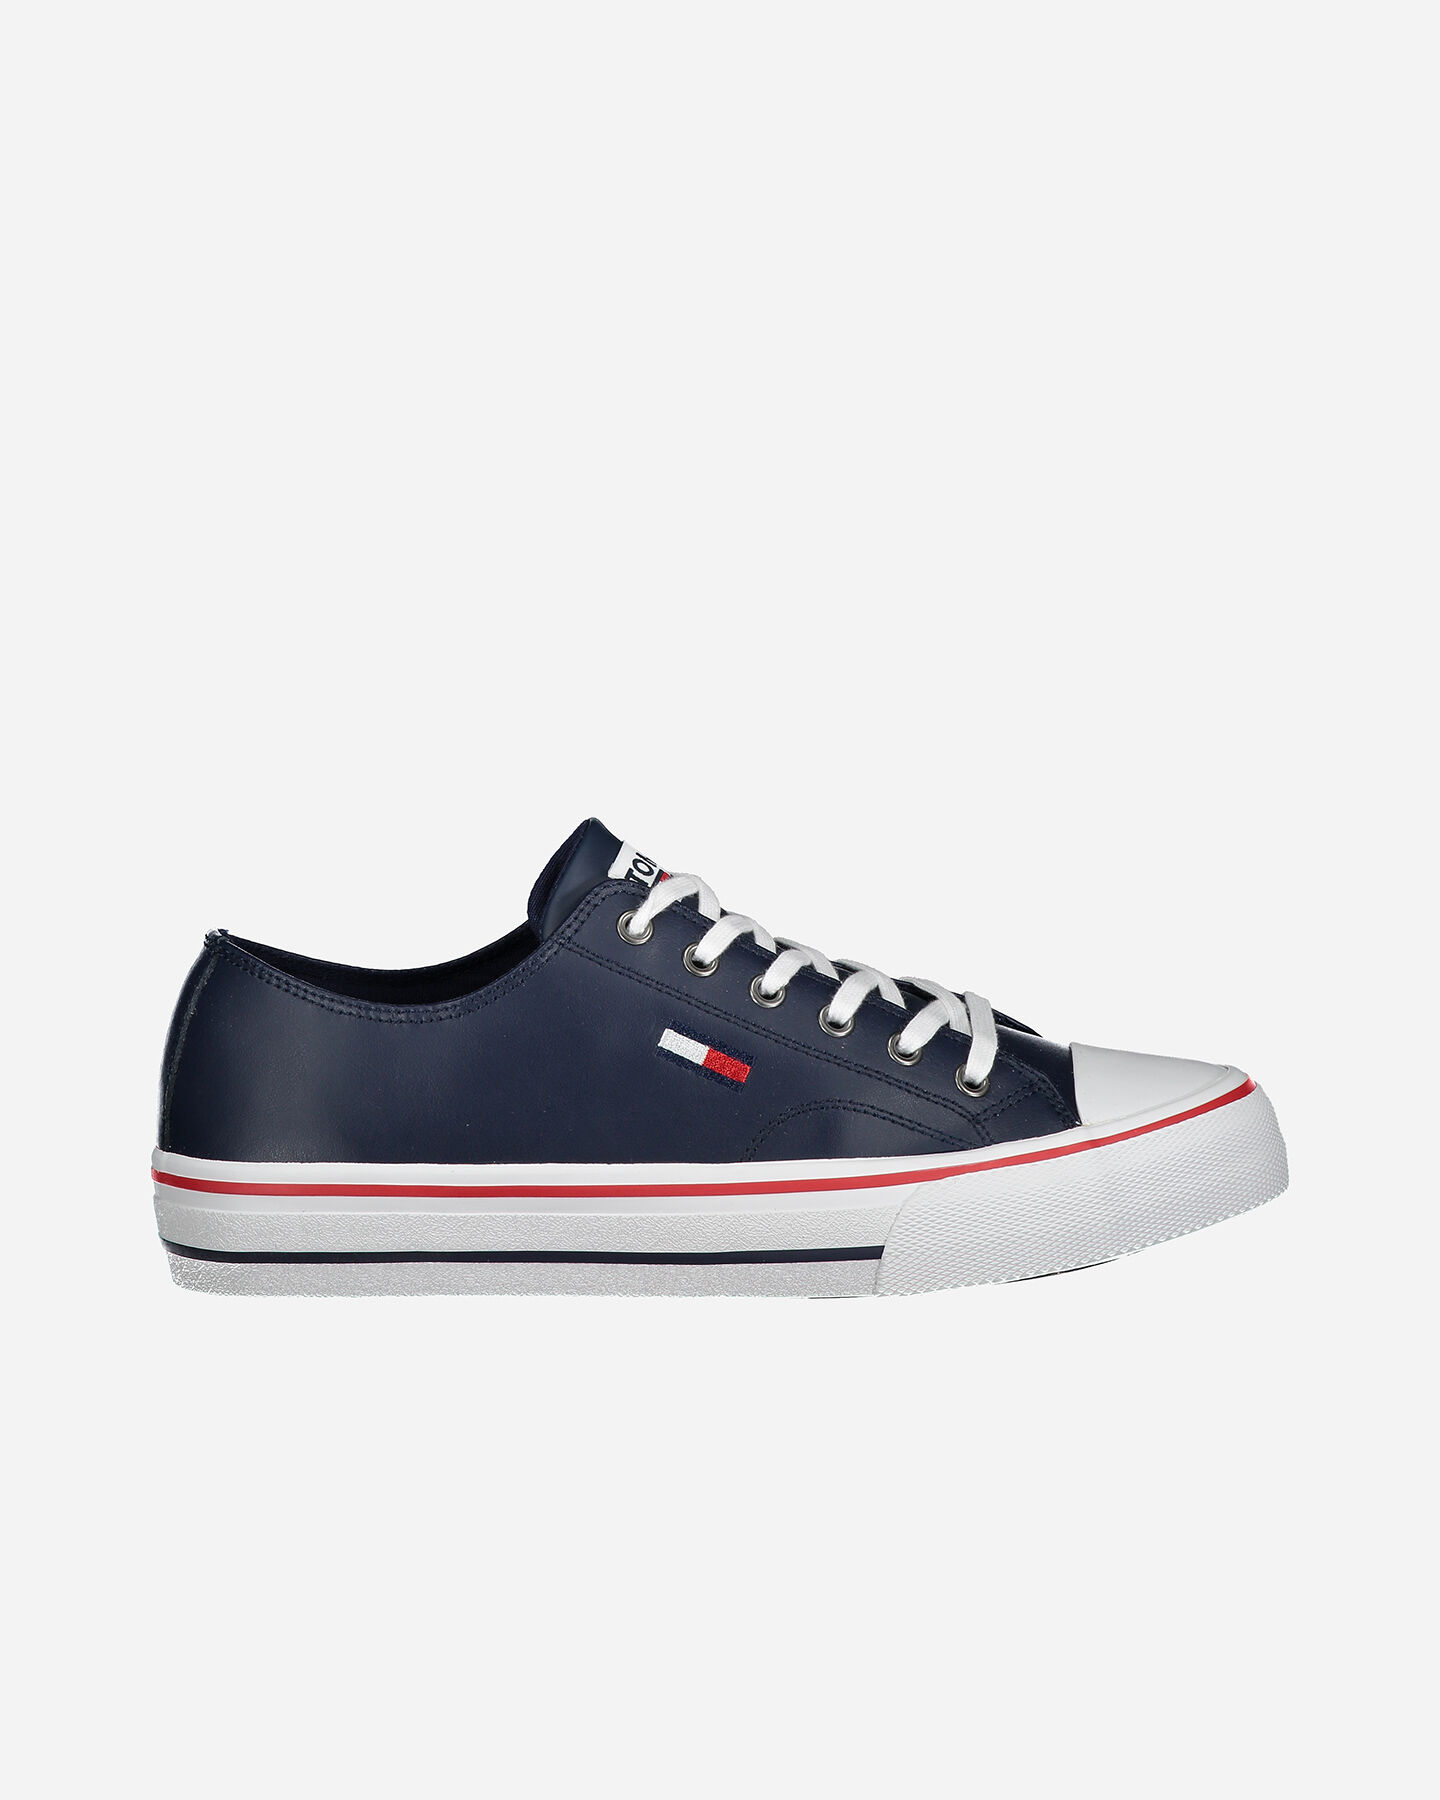  Scarpe sneakers TOMMY HILFIGER ICONIC CITY M S4074055|CBK|40 scatto 0